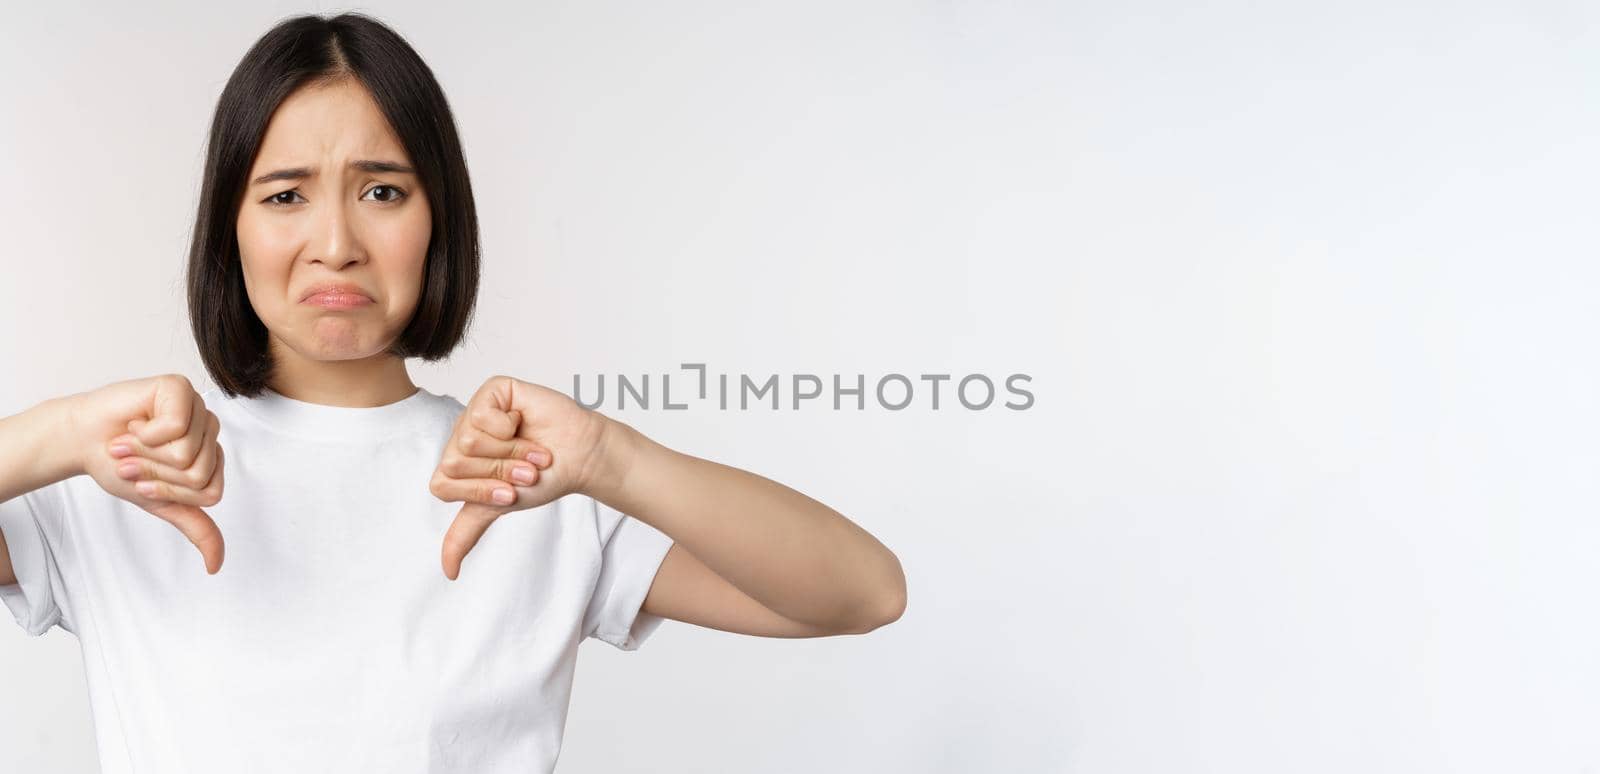 Image of asian woman showing thumbs down, dislike smth, looking disappointed, standing over white background. Copy space